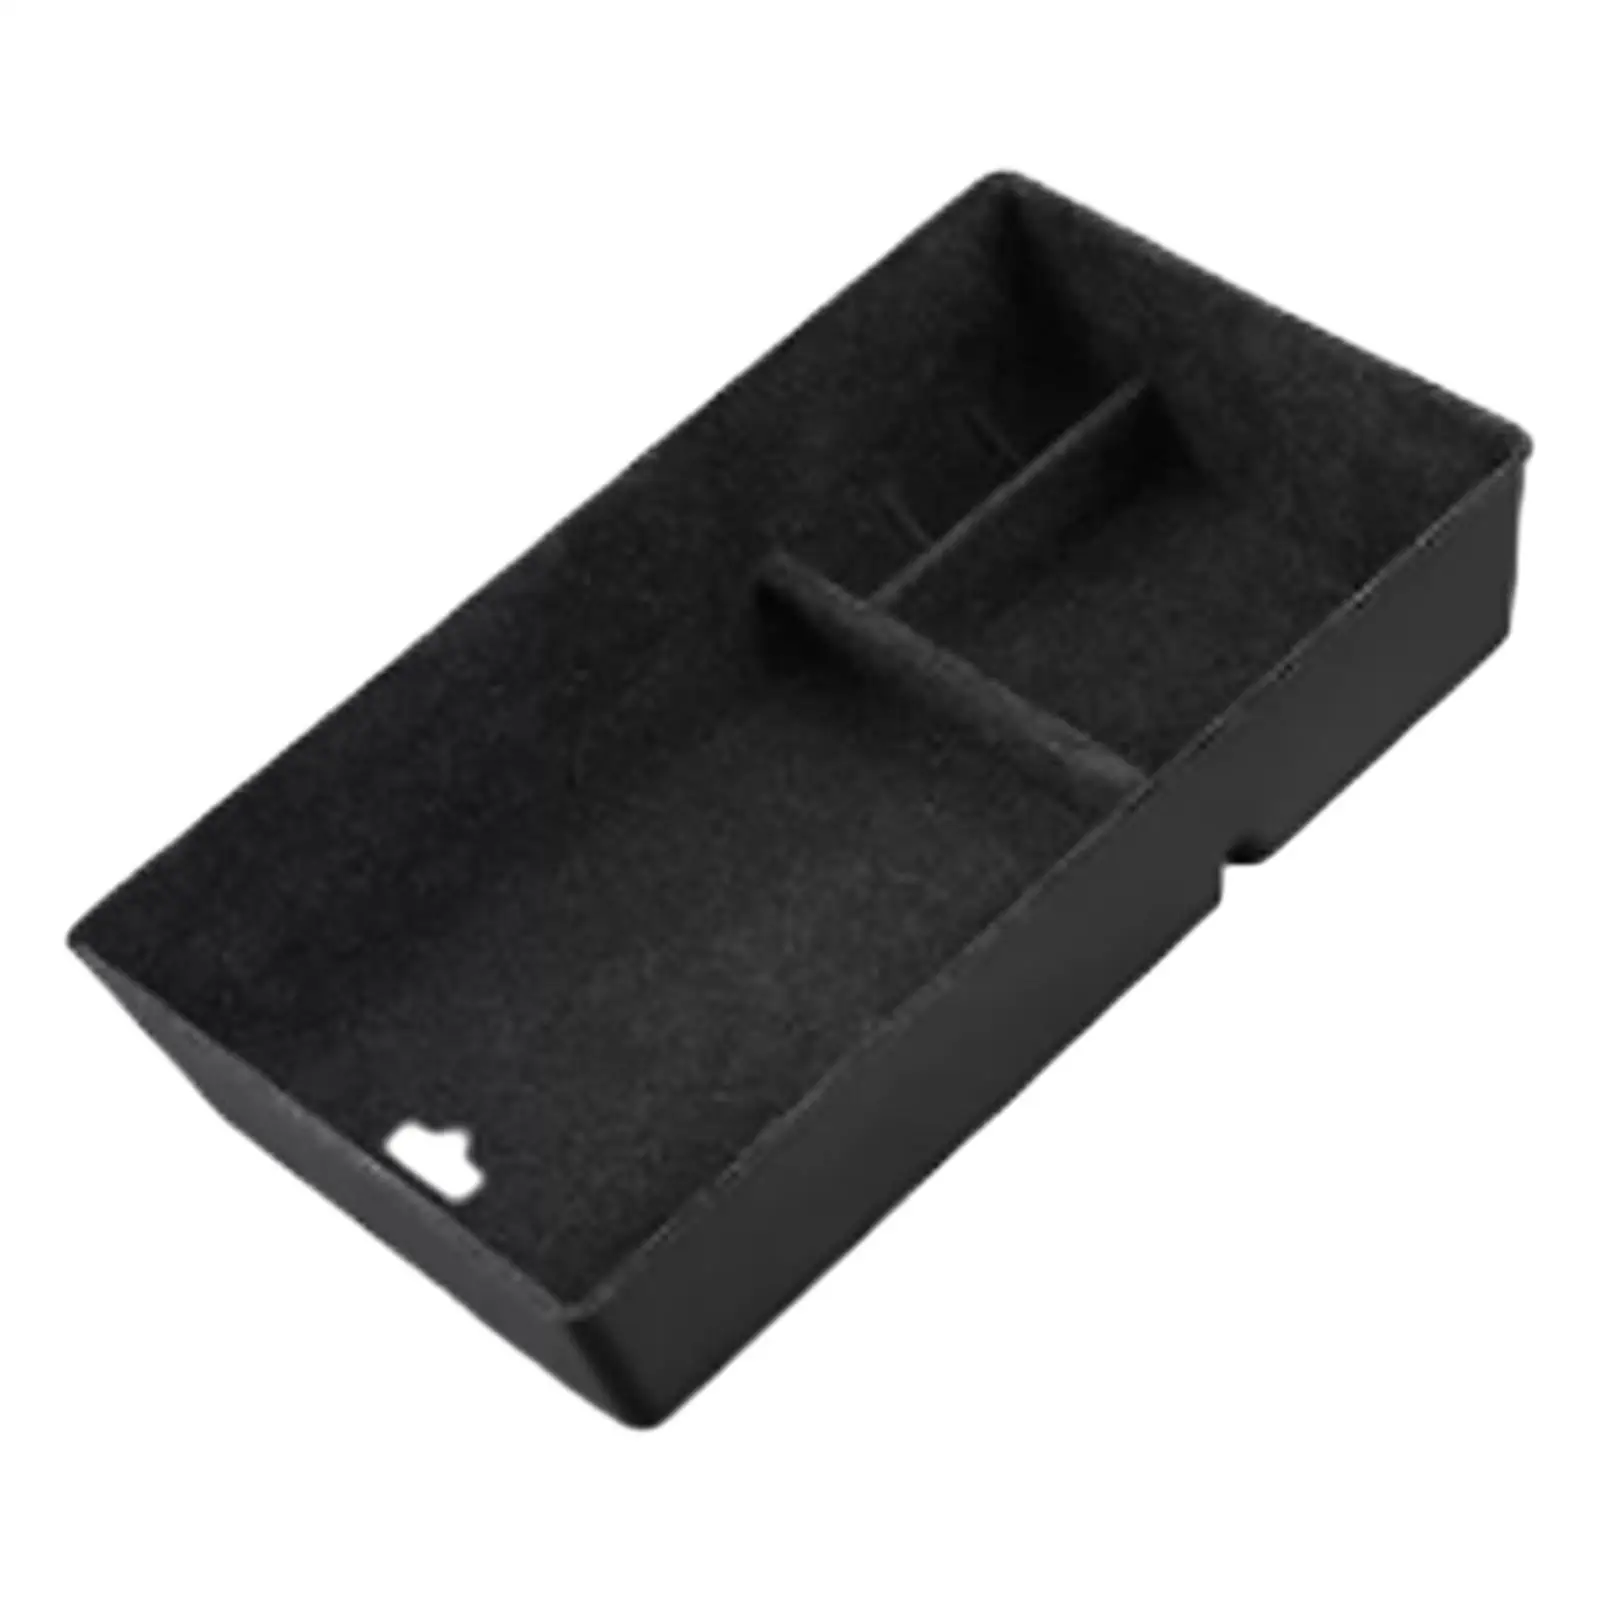 Armrest Storage Easily Install Interior Accessories Automobile Holder for Mercedes Benz 2022 to 2024 Replace Easily Install